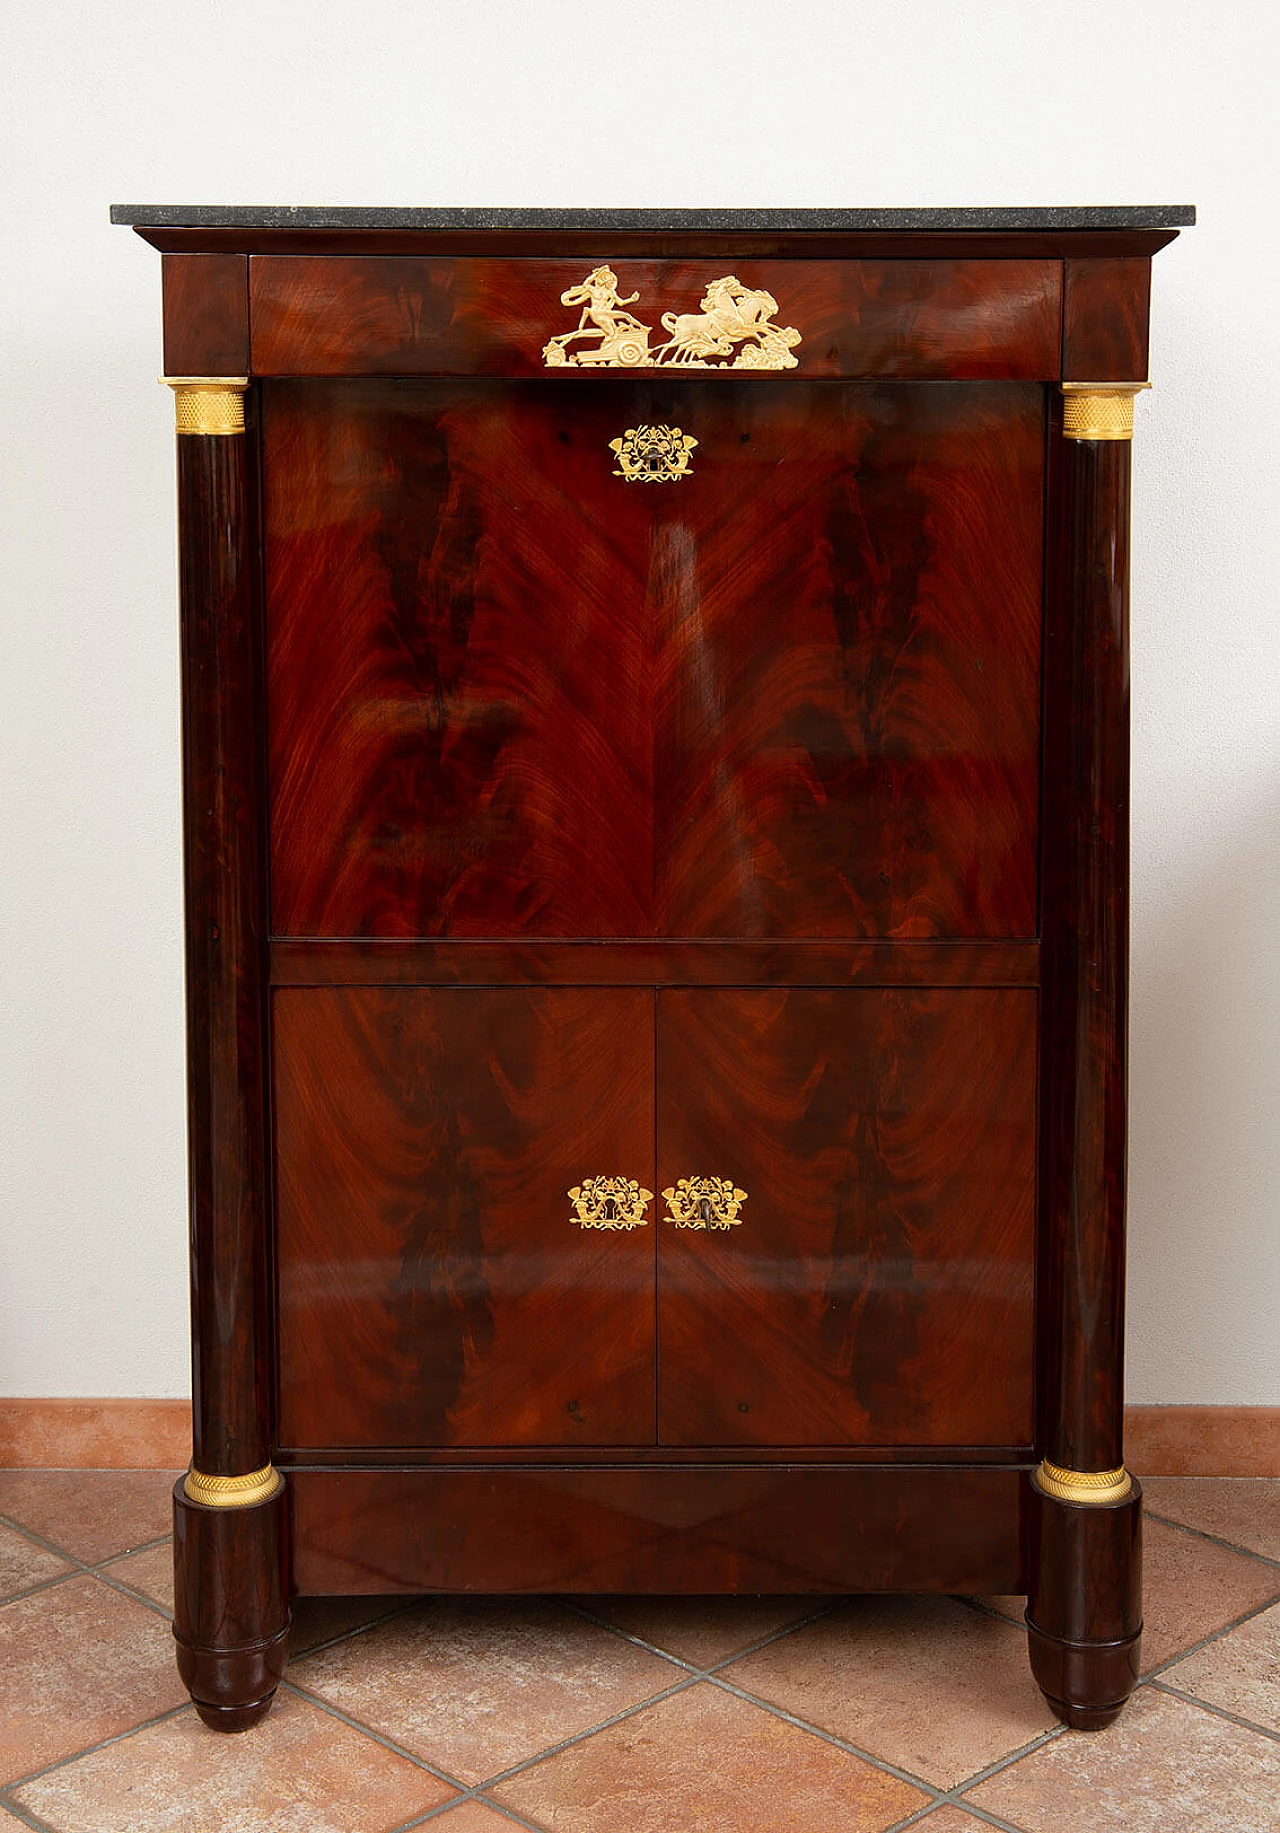 Mahogany feather Empire secrétaire with gilded bronze grafts, 19th century 9